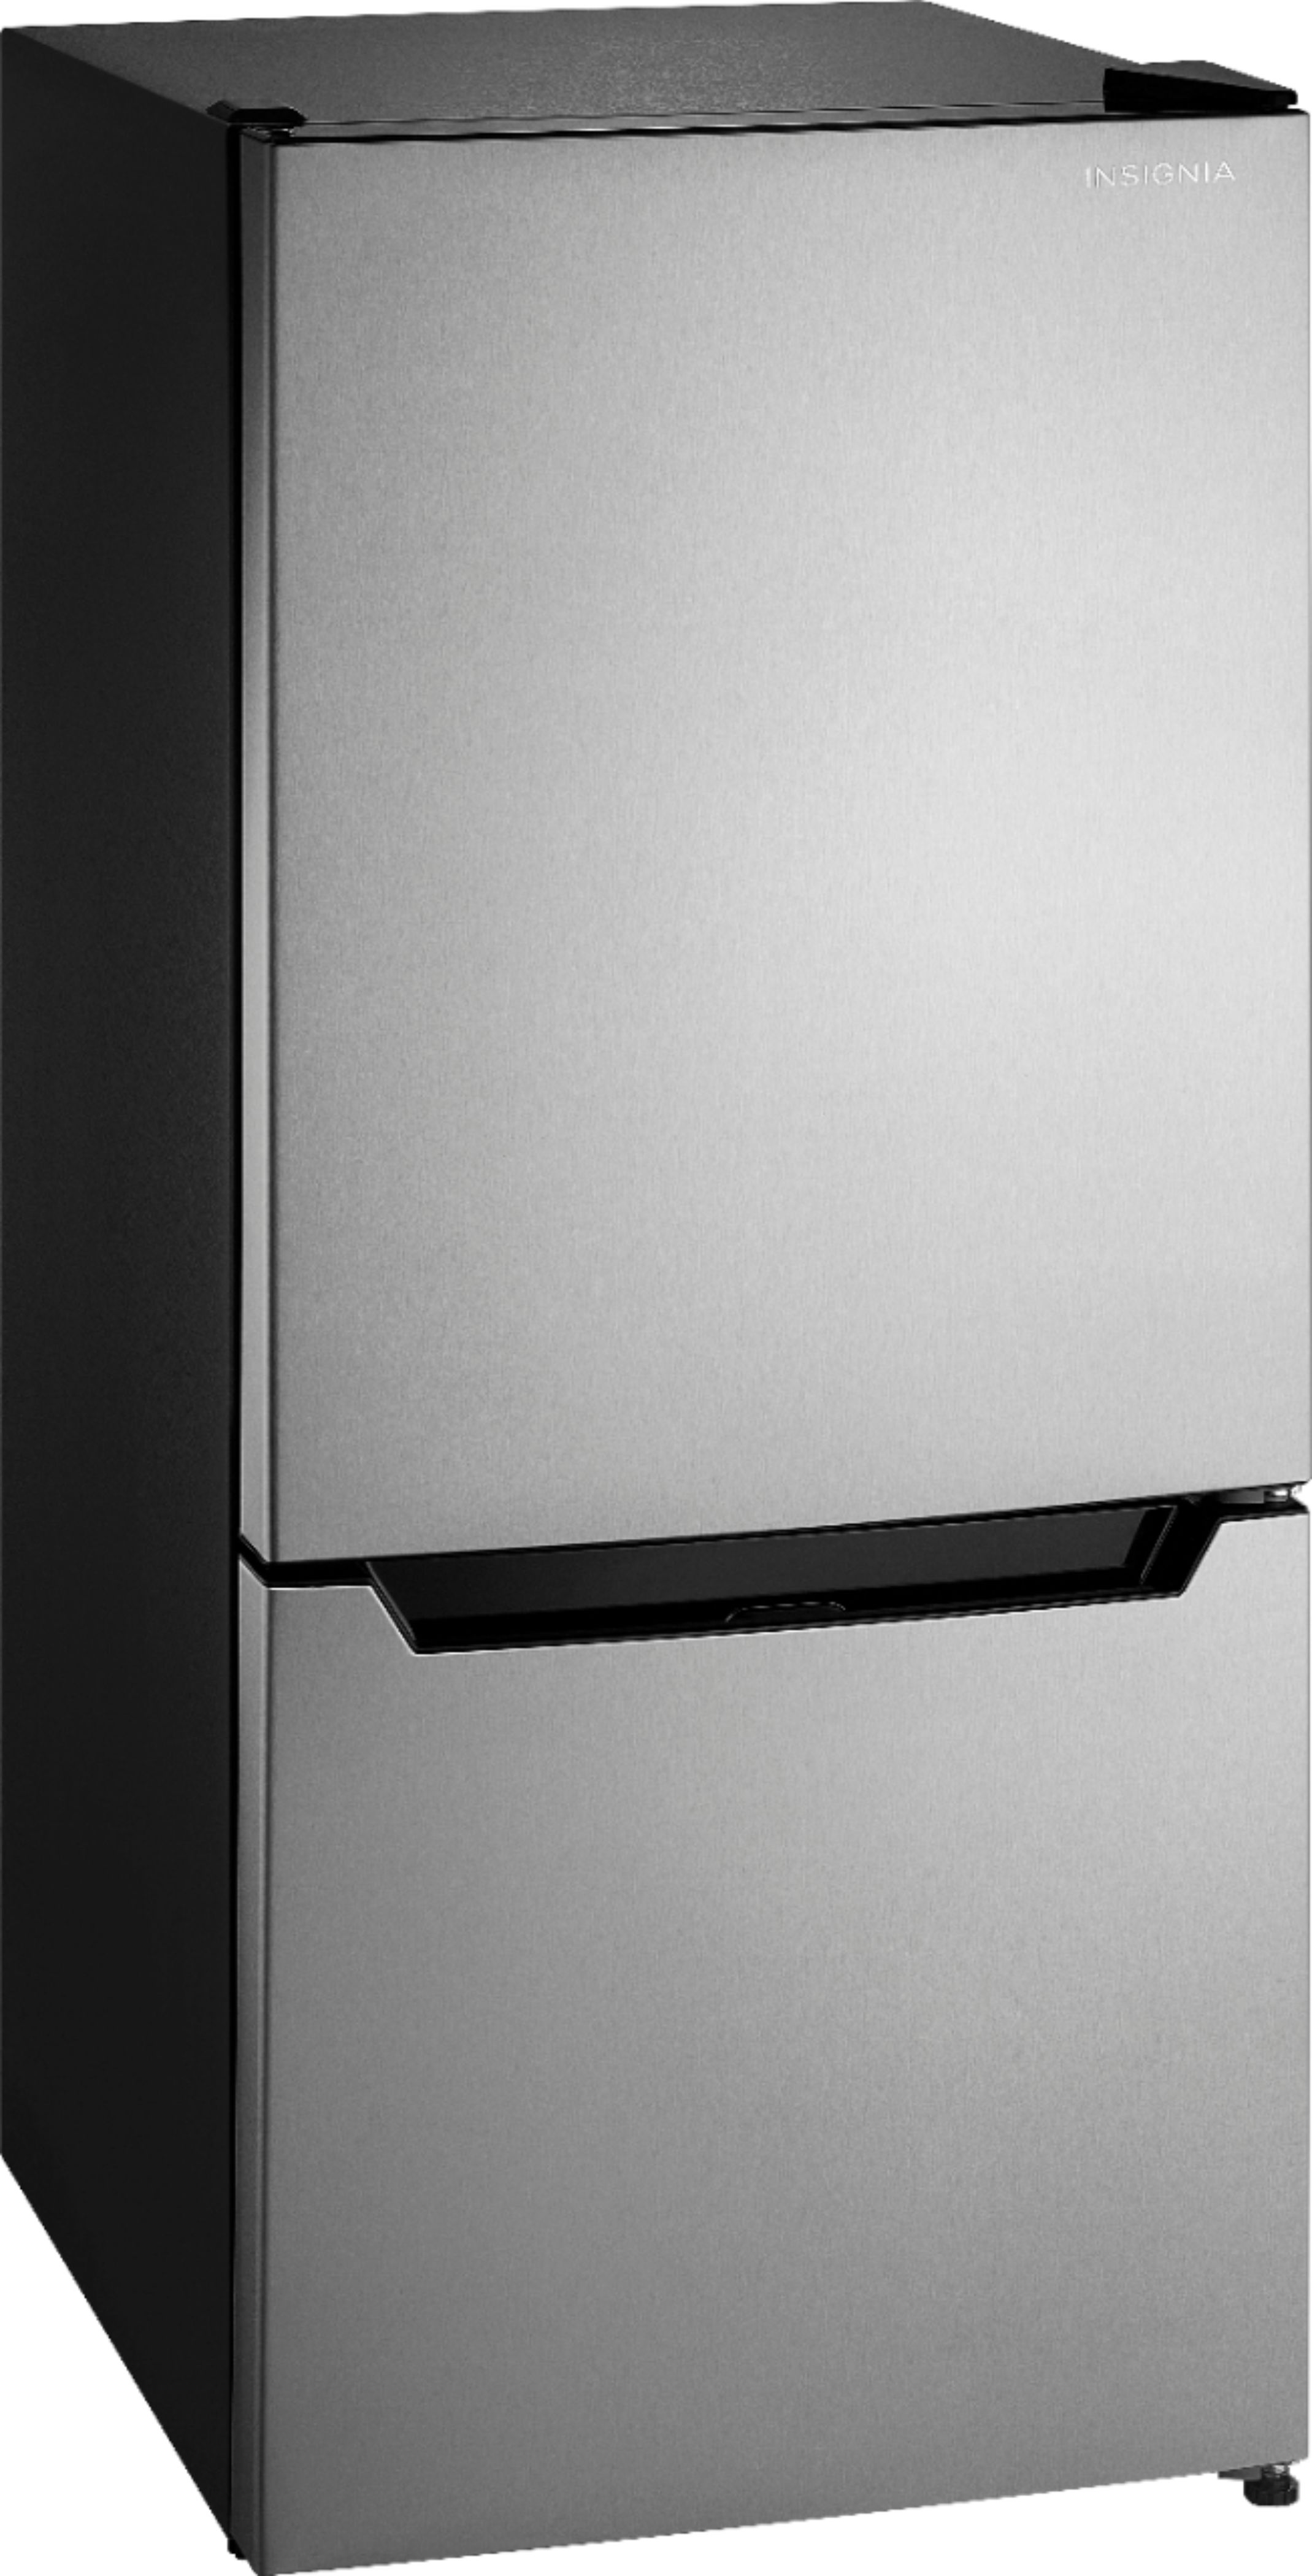 Angle View: Insignia™ - 4.1 Cu. Ft. Mini Fridge with Bottom Freezer - Stainless steel